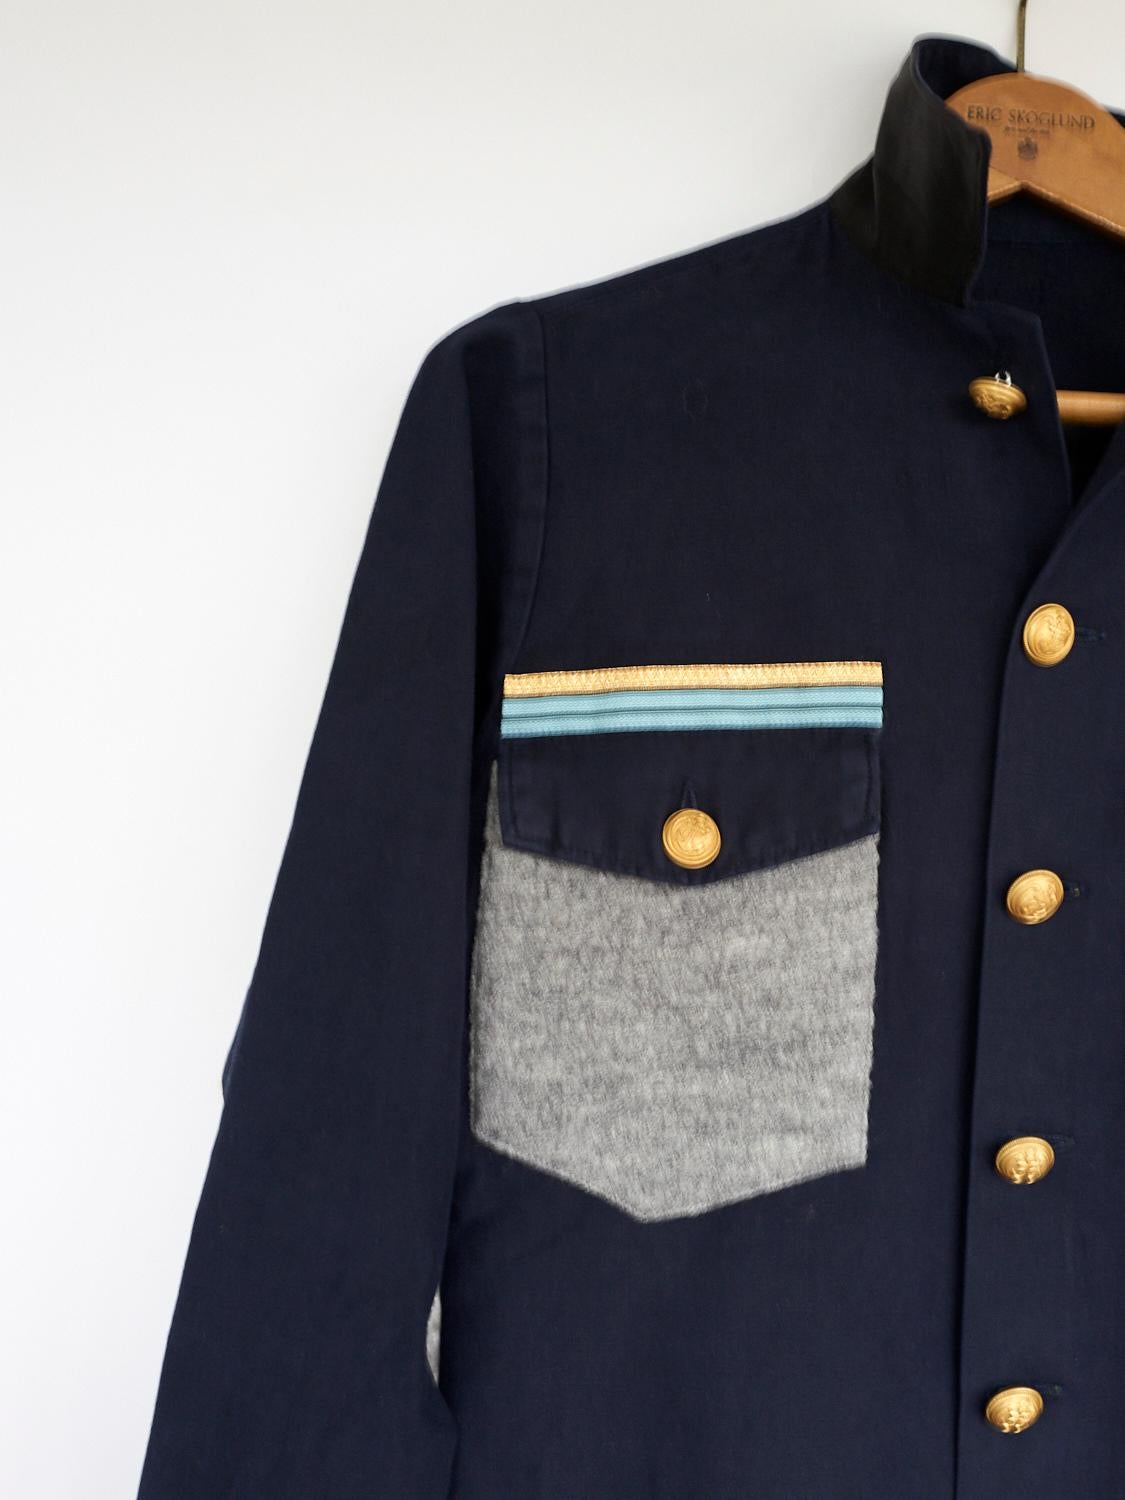 blue jacket with gold buttons